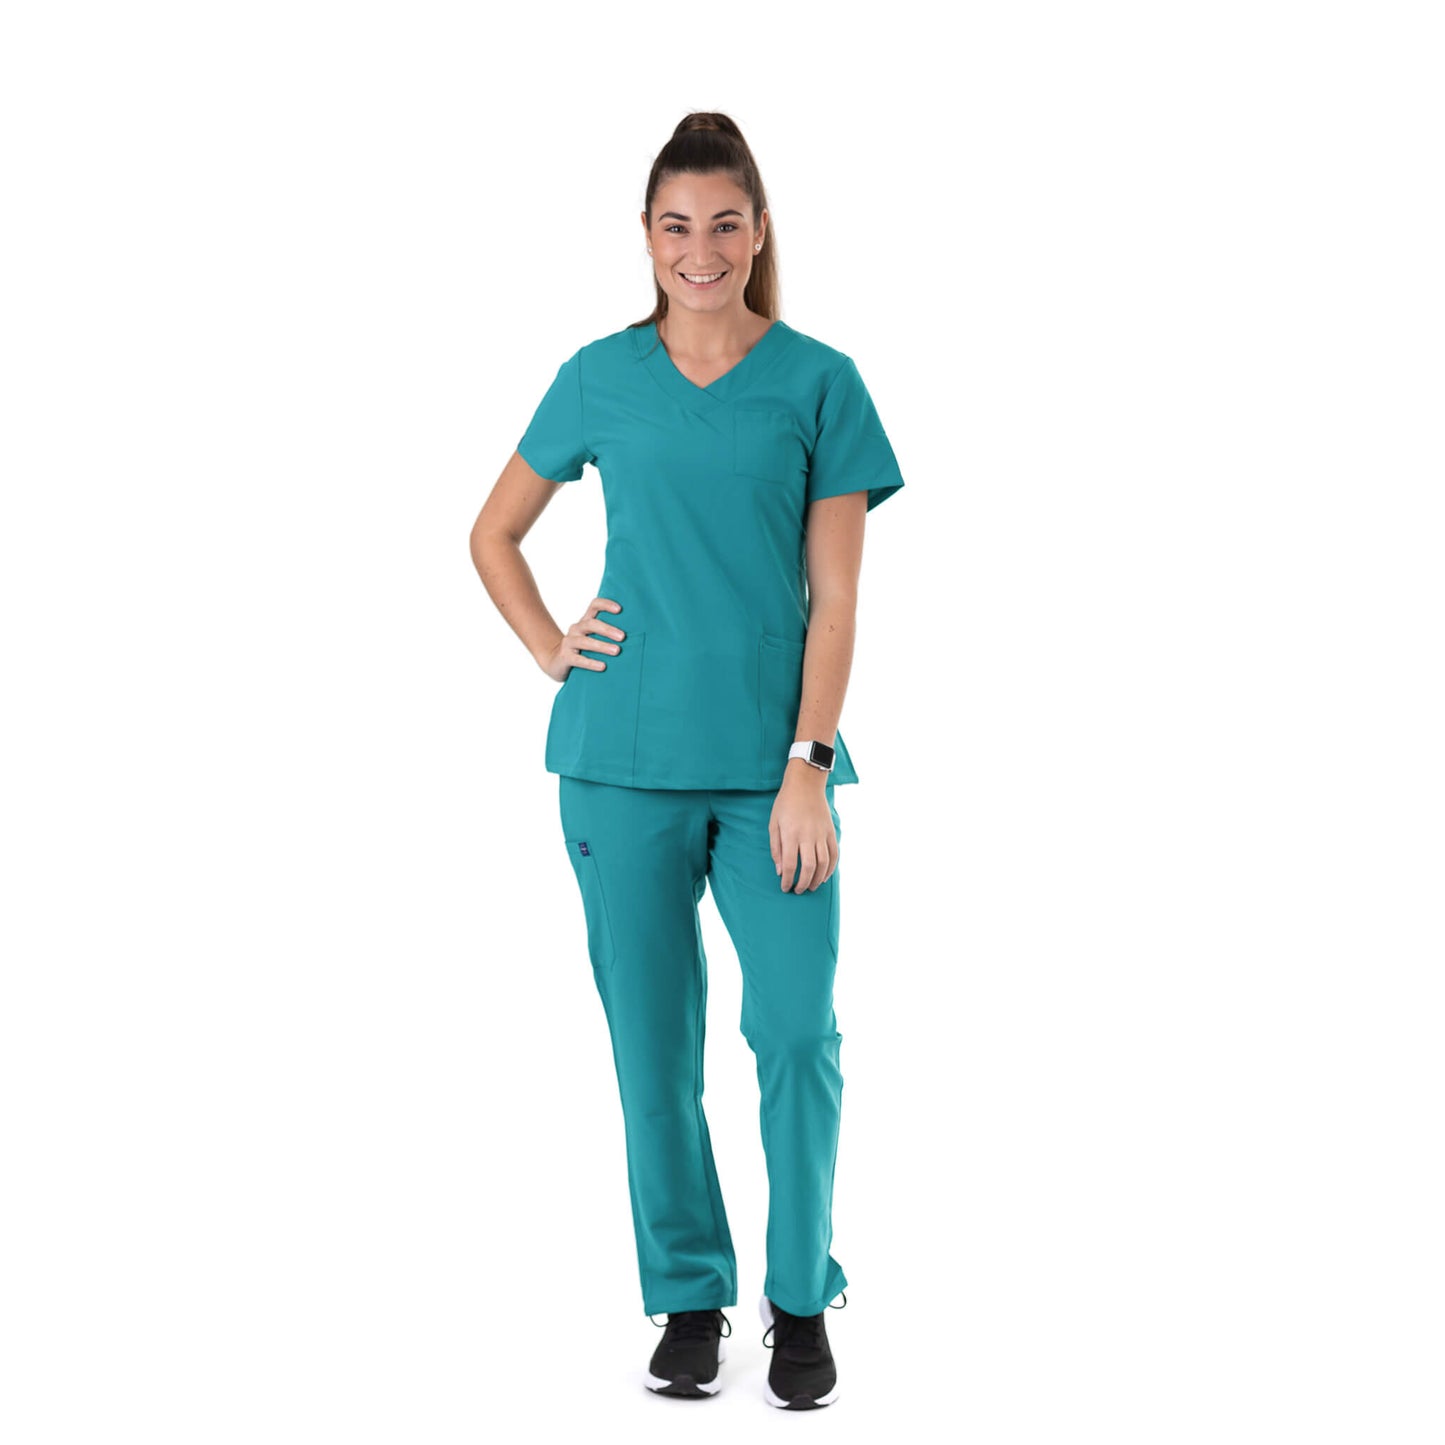 Nurse wearing Teal Medical Scrub Set from Fit Right Medical Scrubs